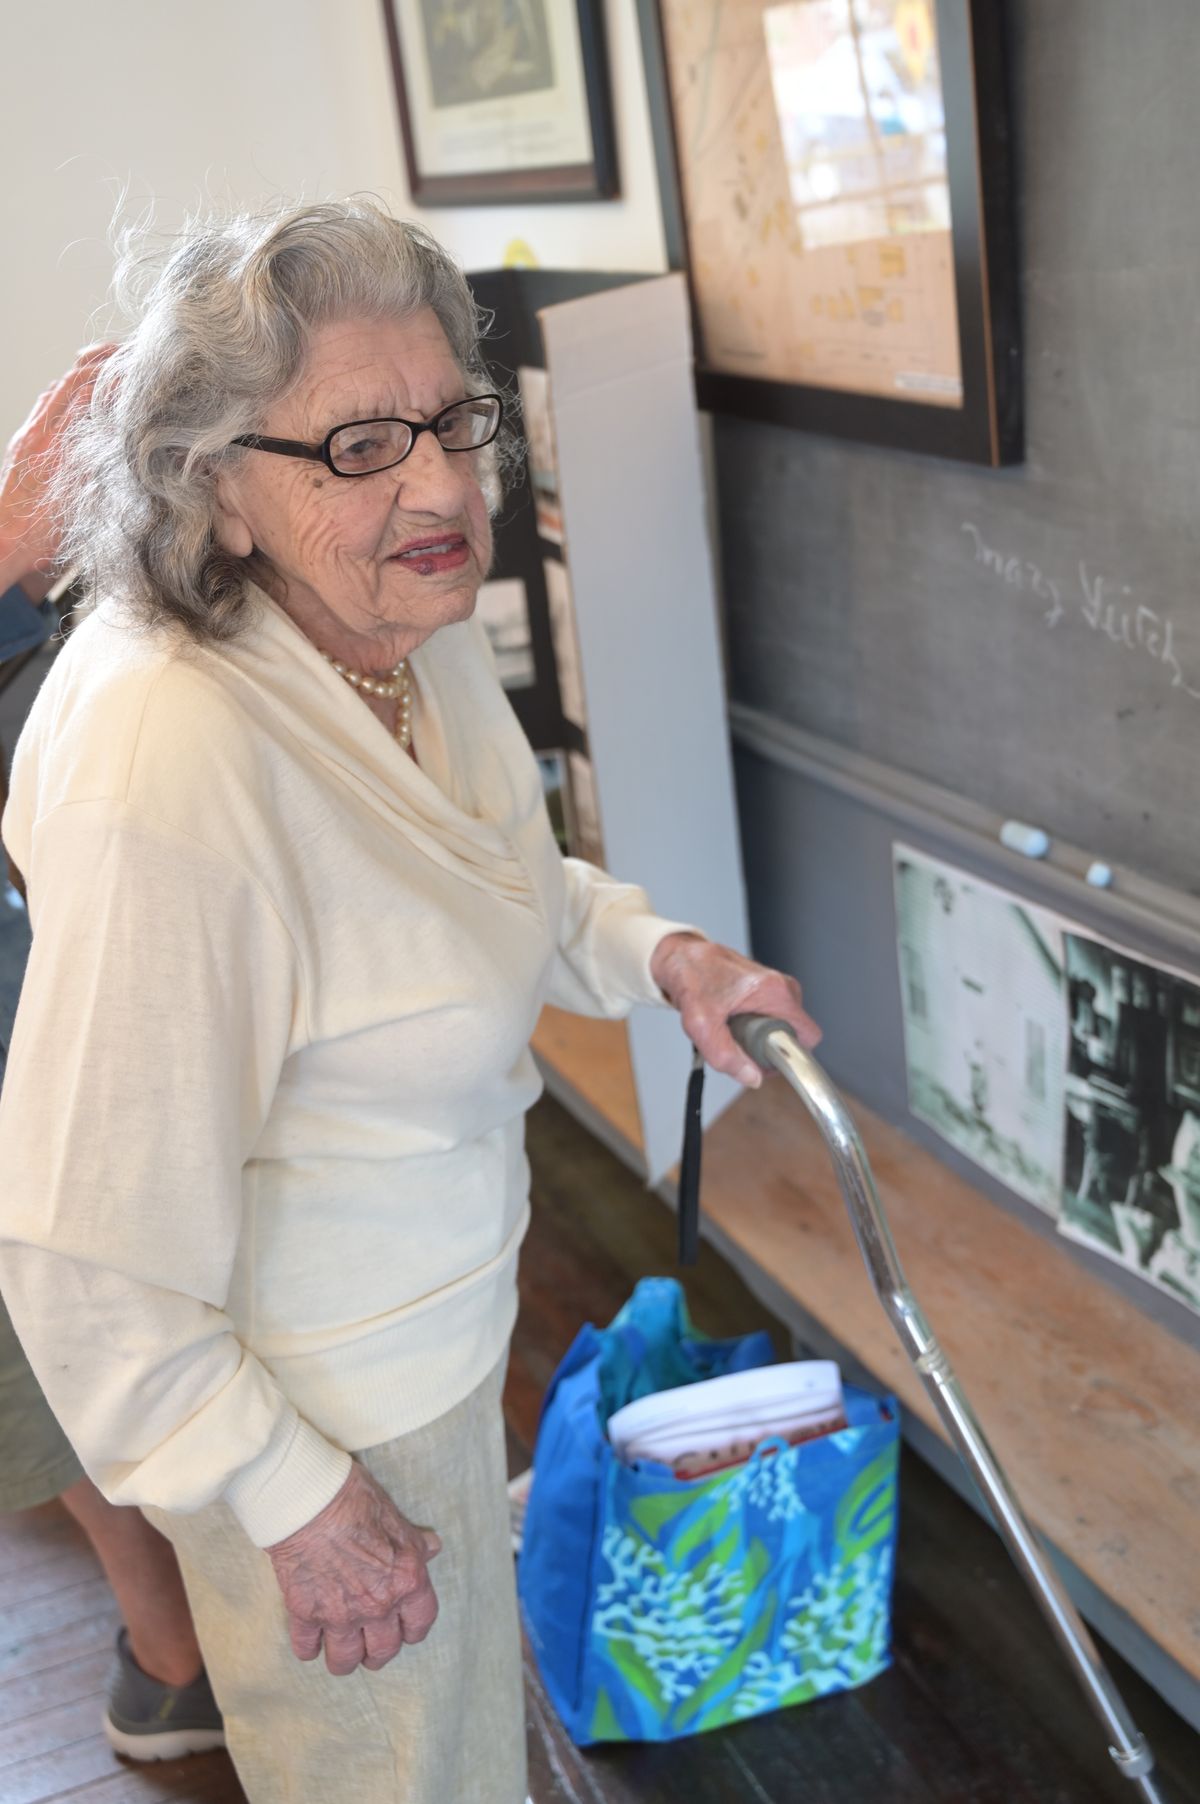 Almost a century later, student revisits her one-room schoolhouse